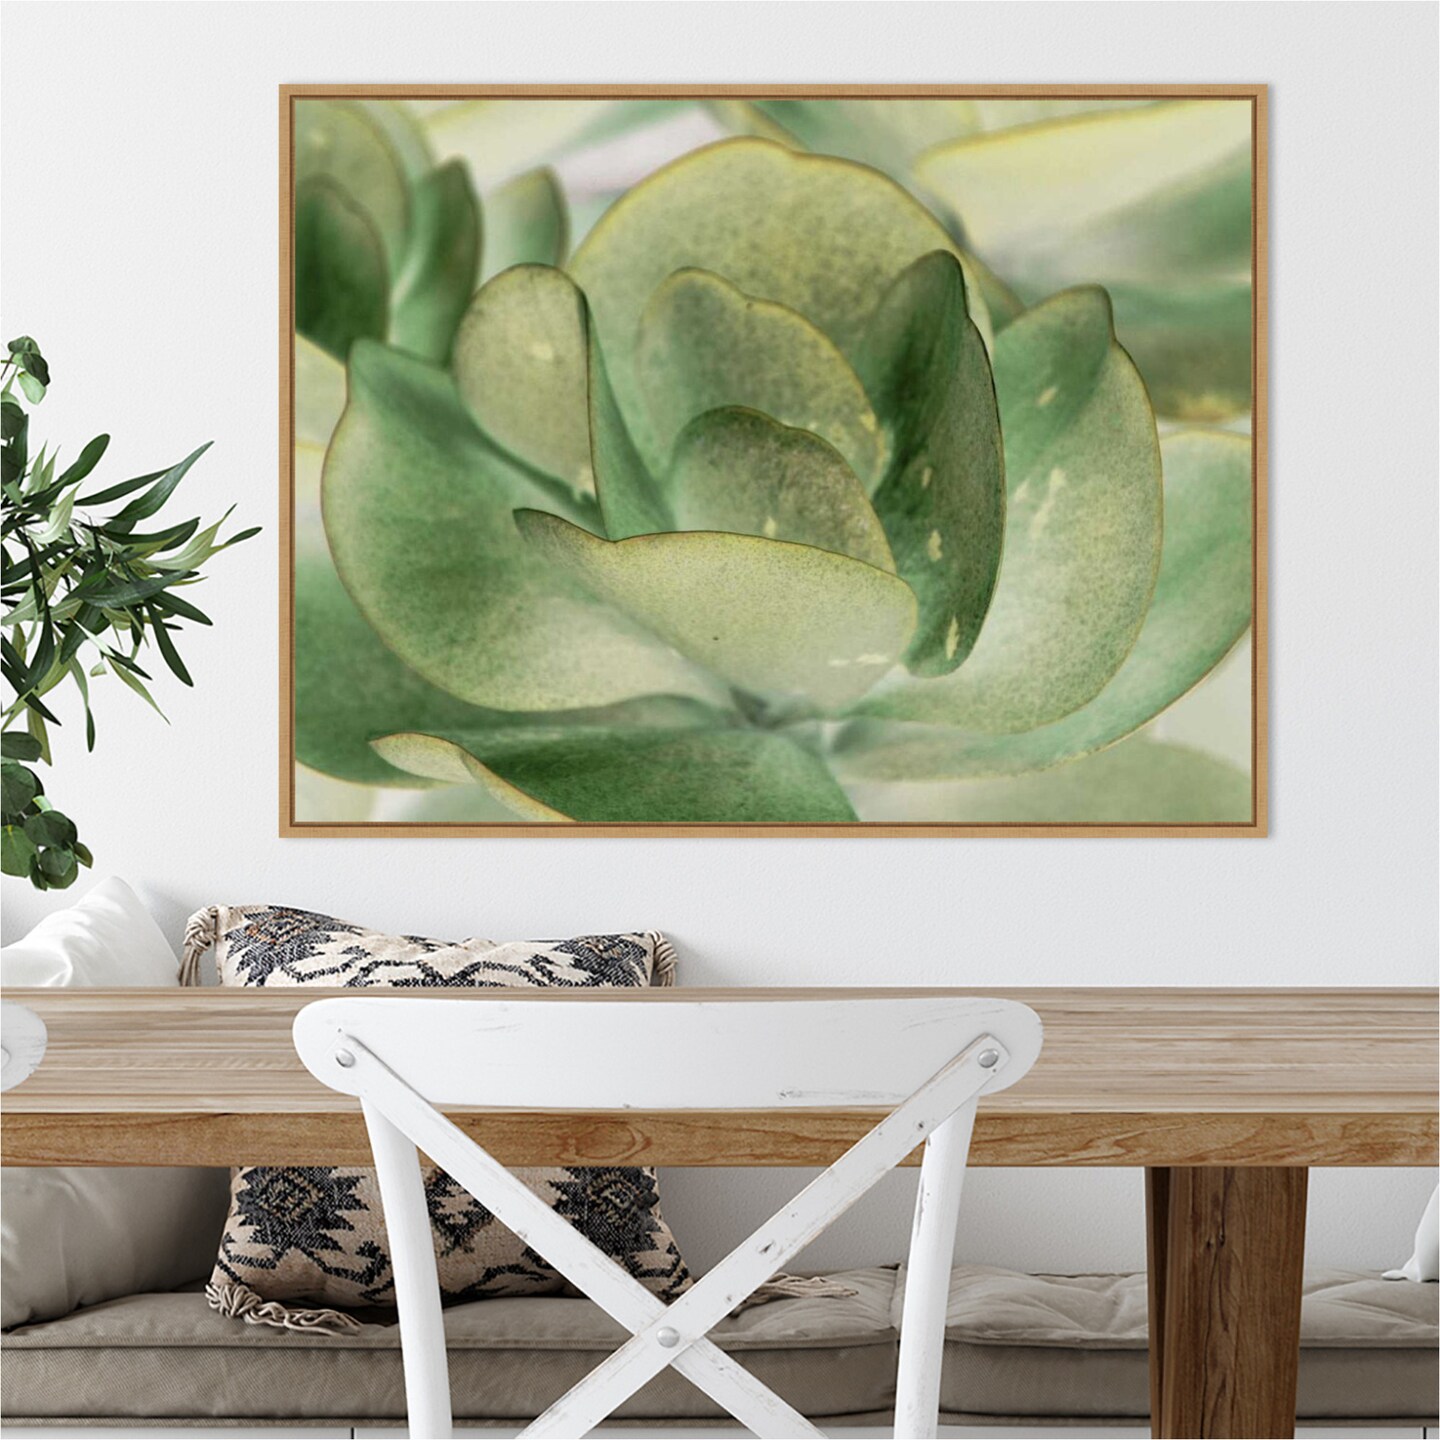 Petal I by Tang Ling 30-in. W x 23-in. H. Canvas Wall Art Print Framed in Natural